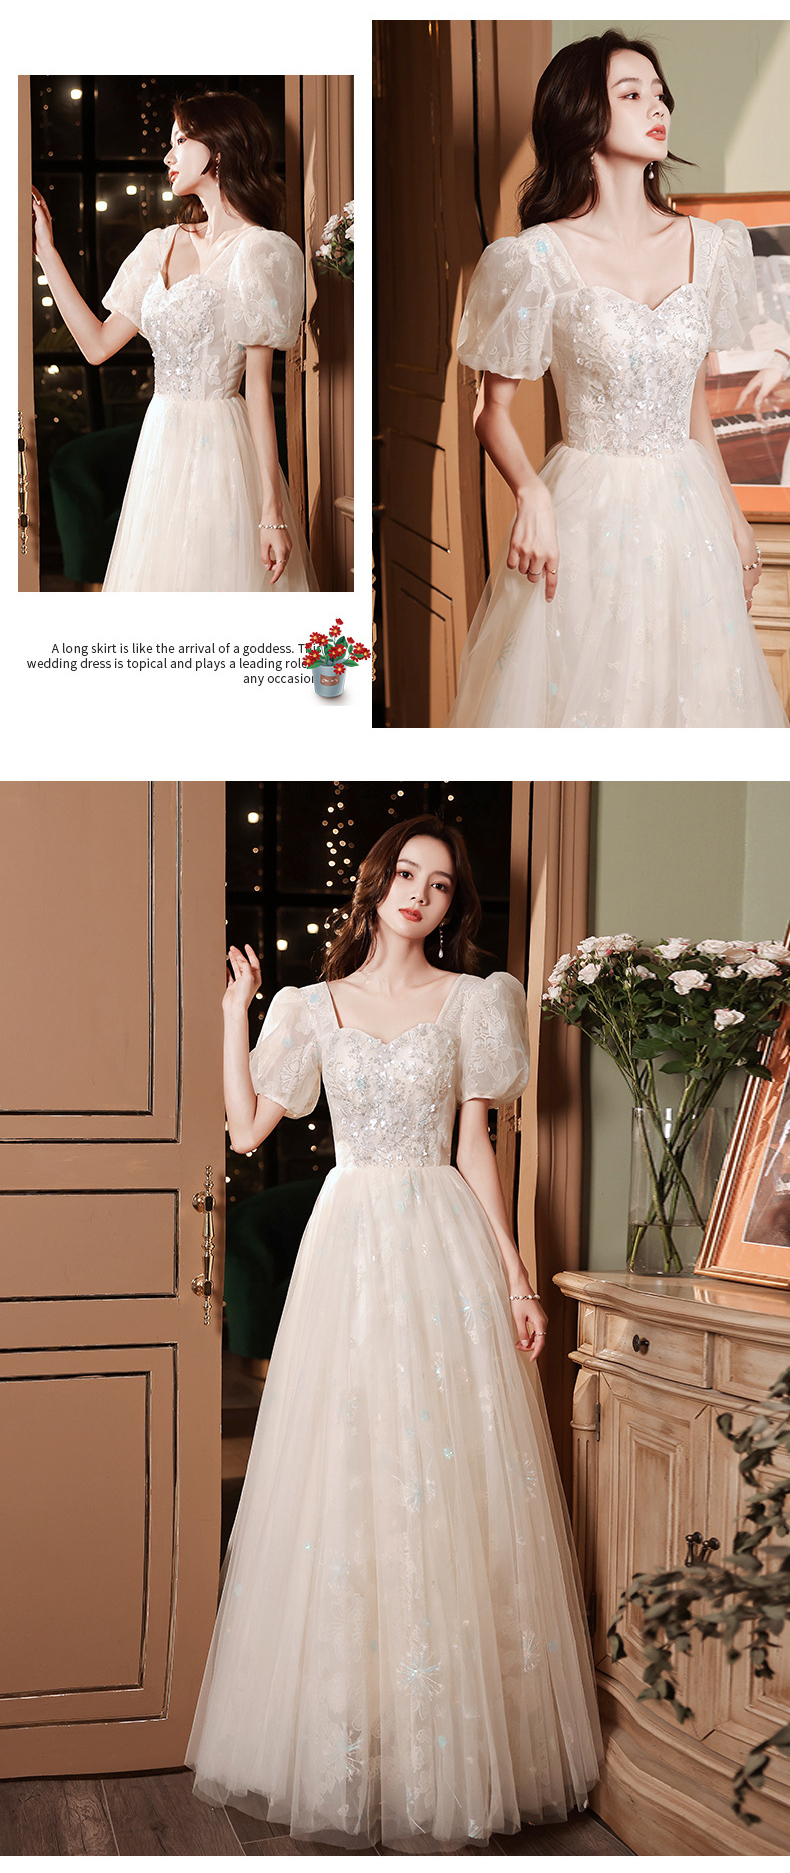 Simple Elegant Evening Dress Short Puff Sleeve Champagne Ball Gown12